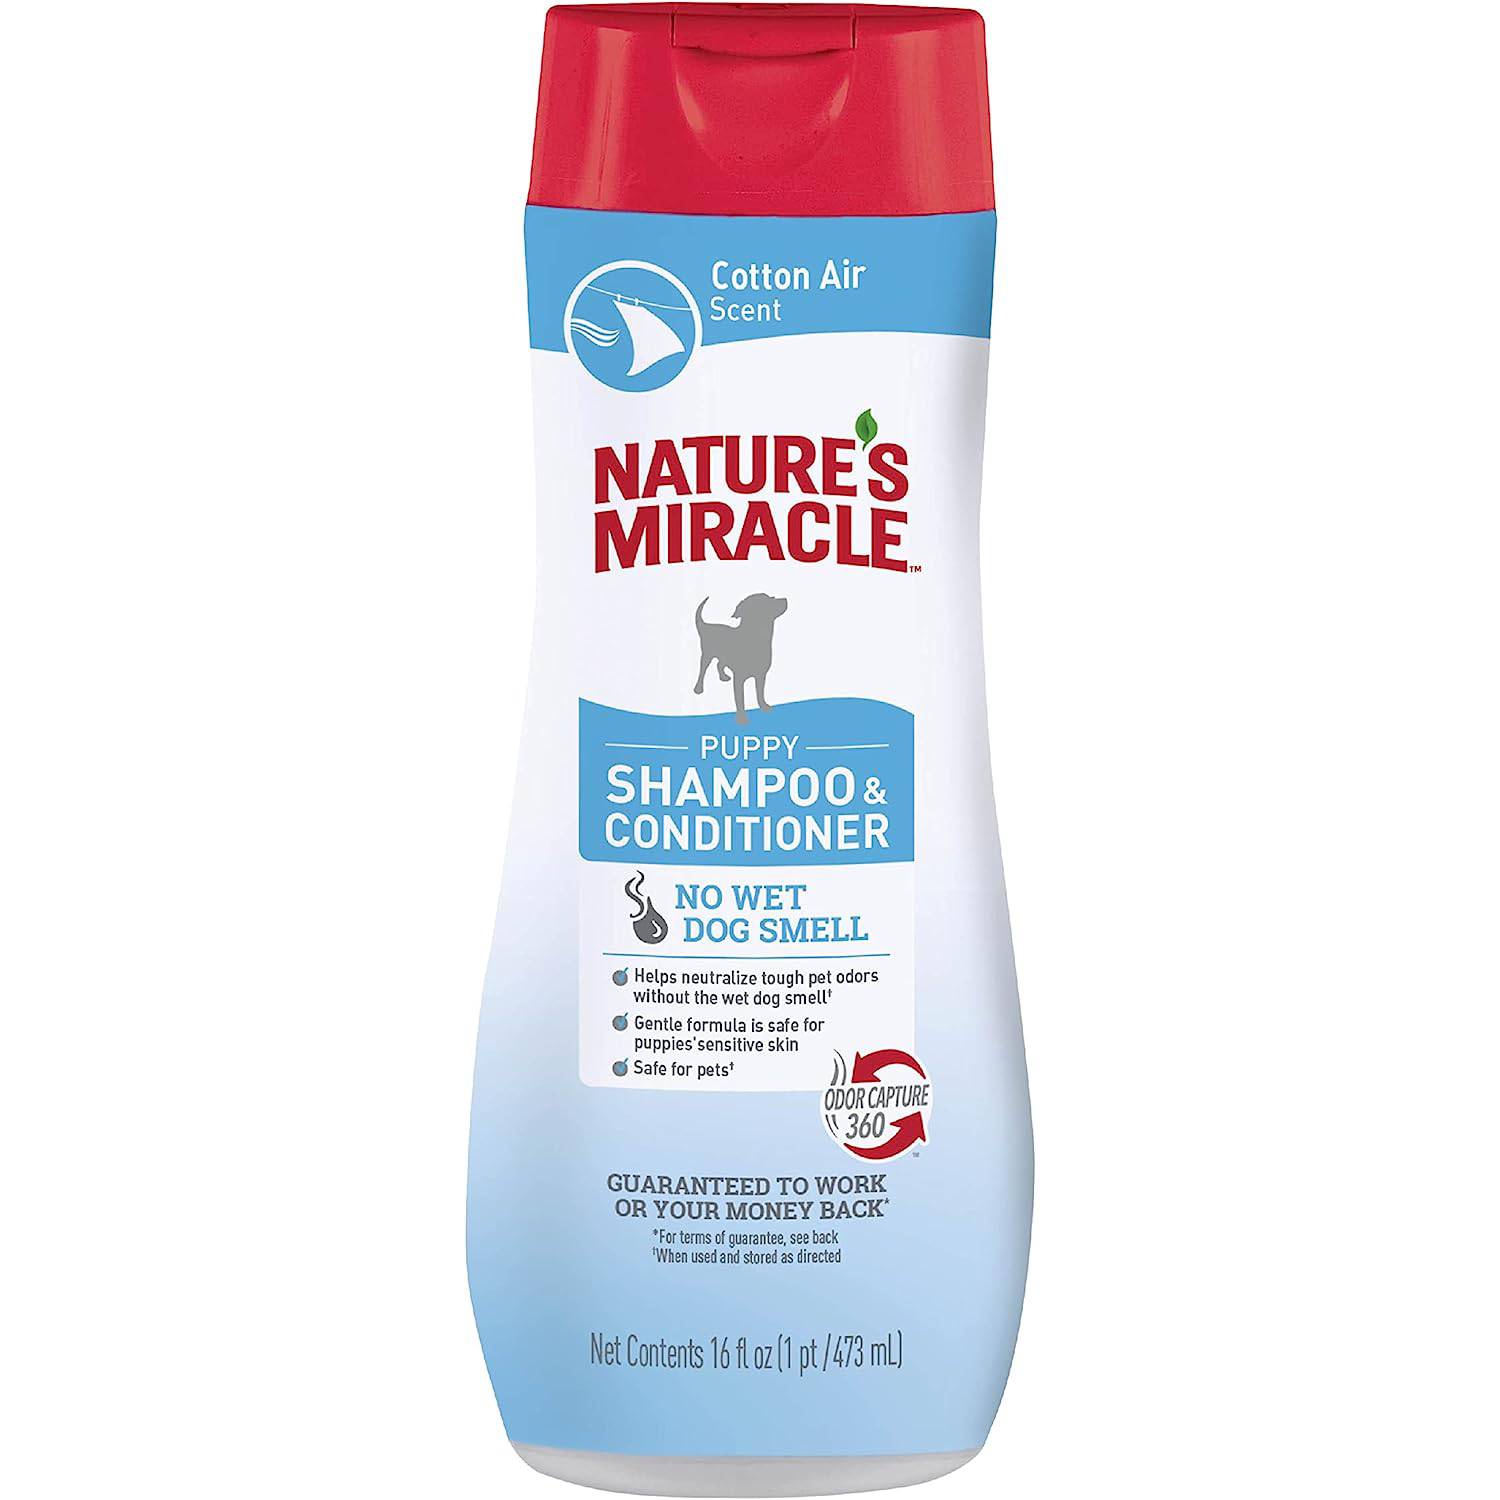 Nature's Miracle Nature’s Miracle Puppy Shampoo & Conditioner